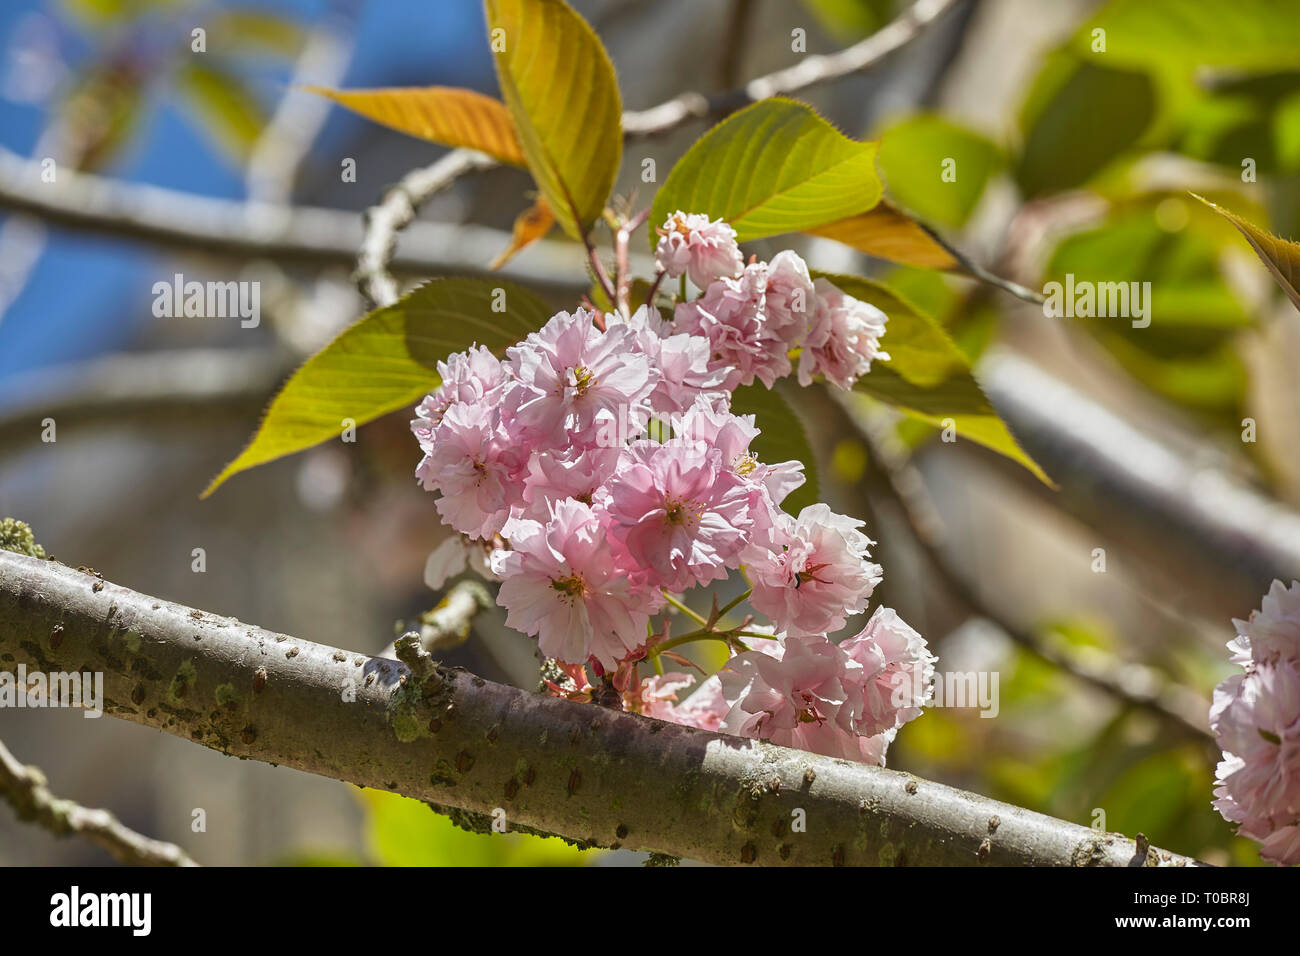 Cherry blossoms in full bloom, in spring. Stock Photo